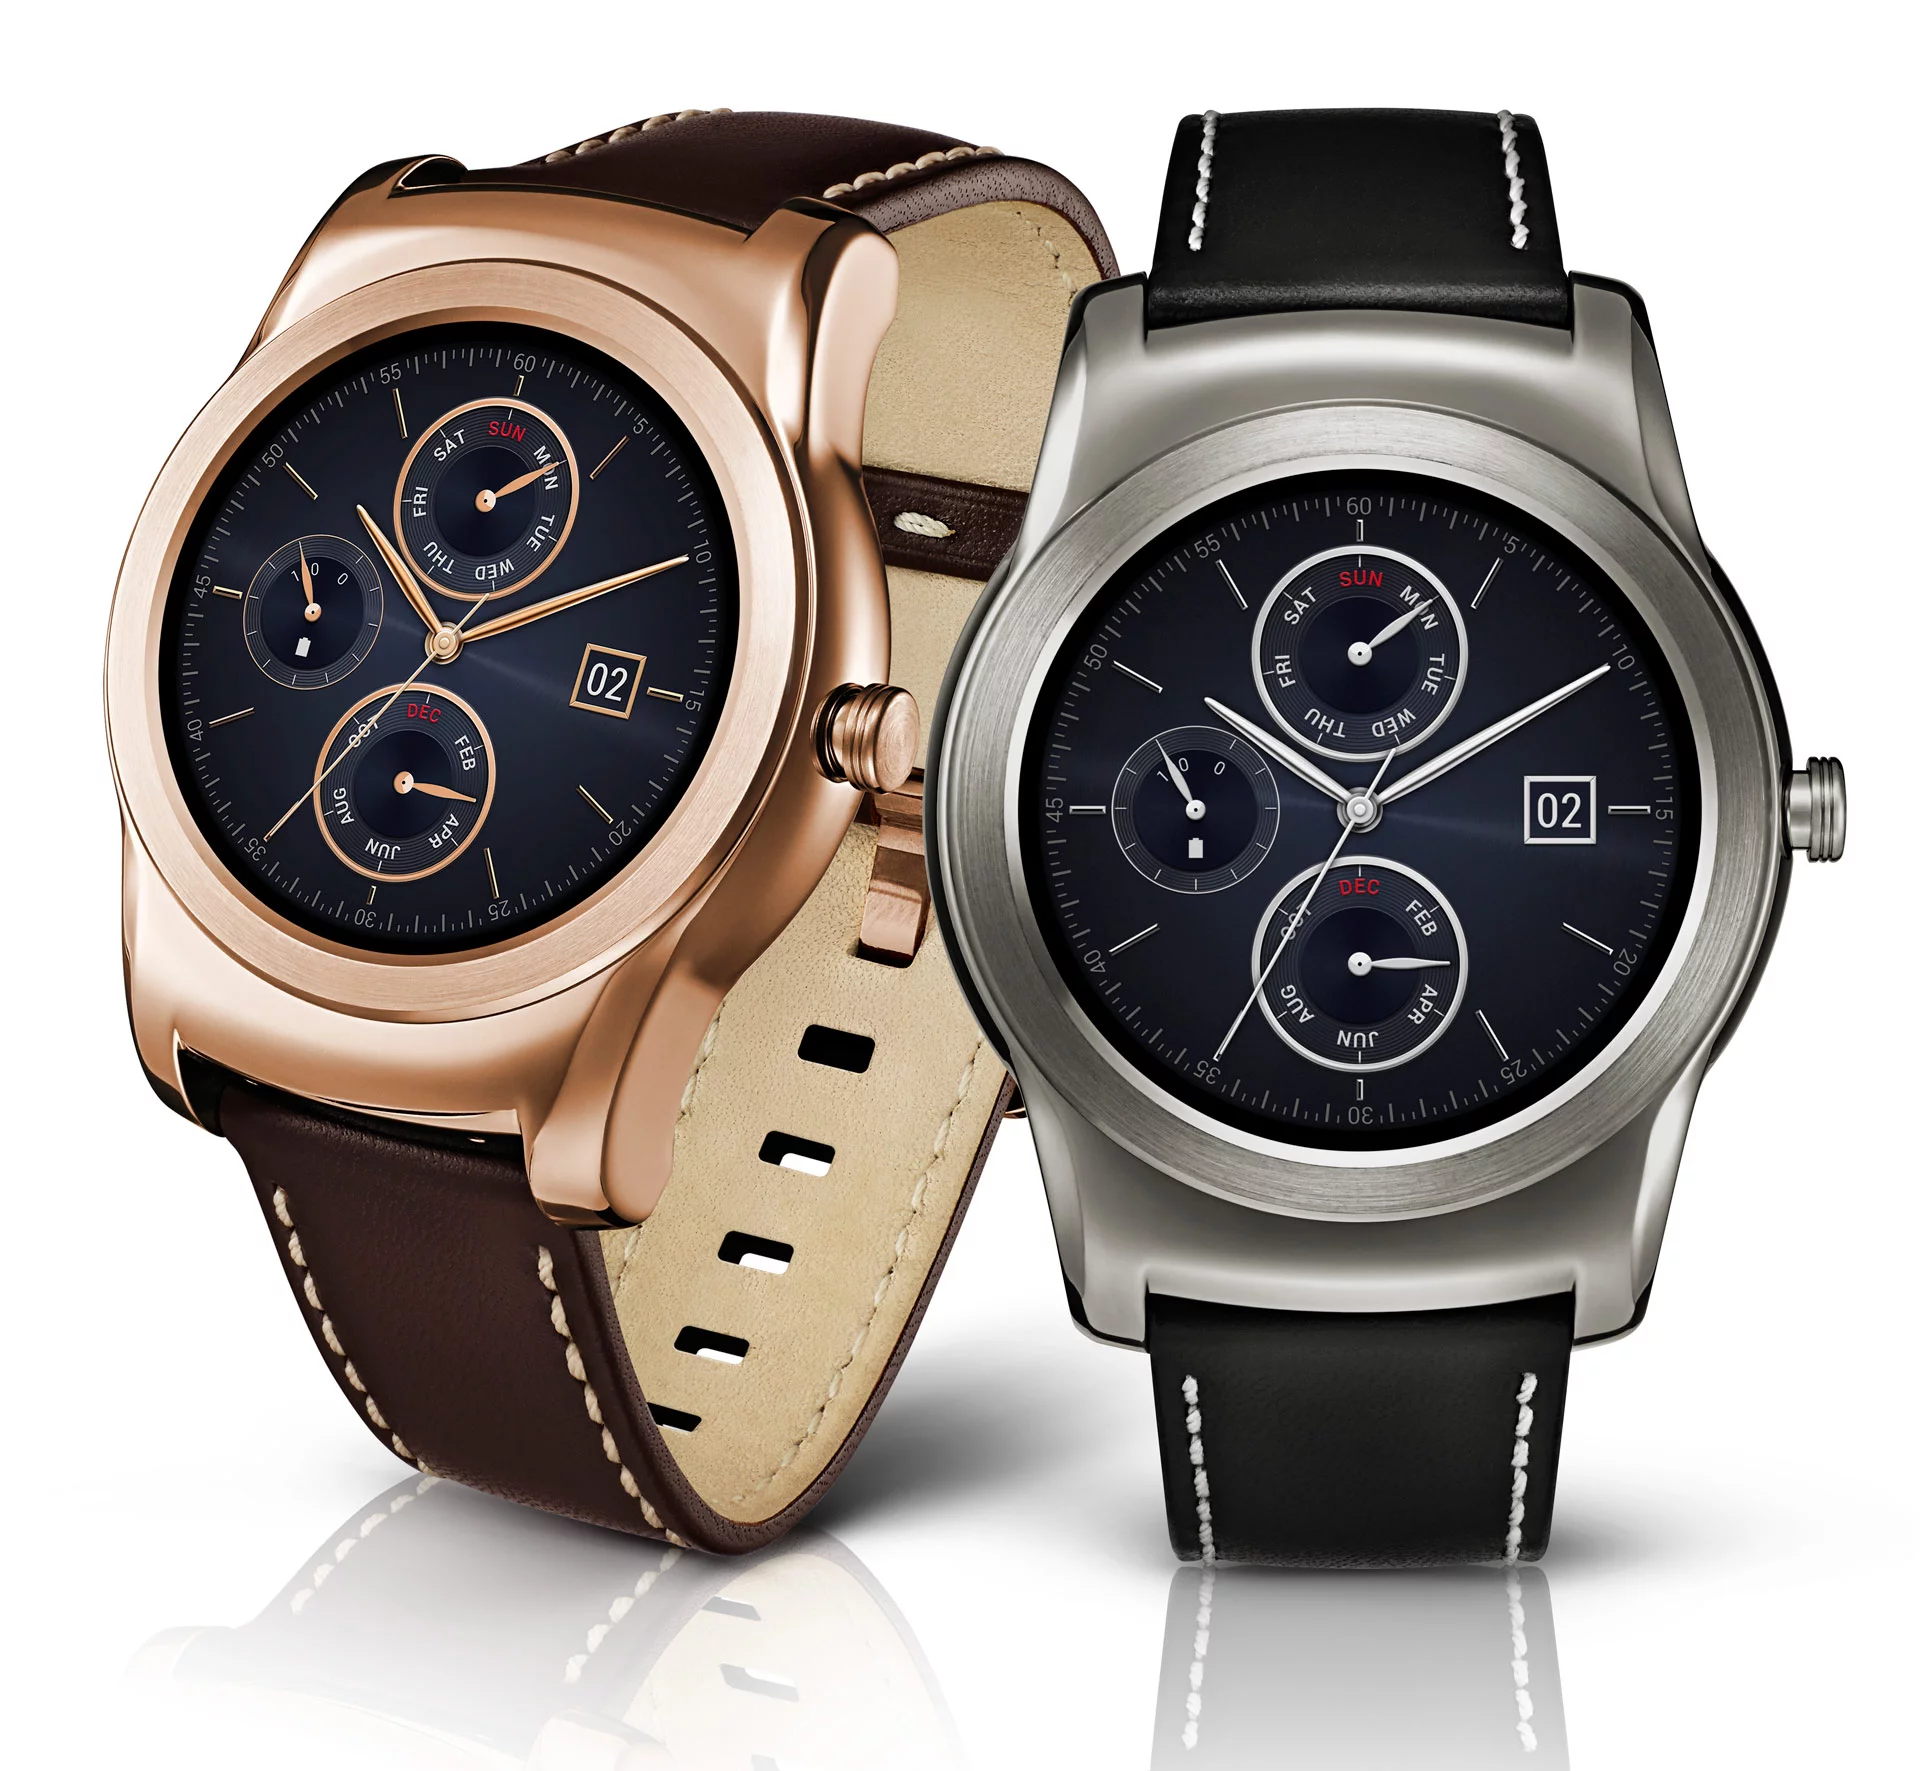 LG WATCH URBANE3 - for some reason we don't have an alt tag here